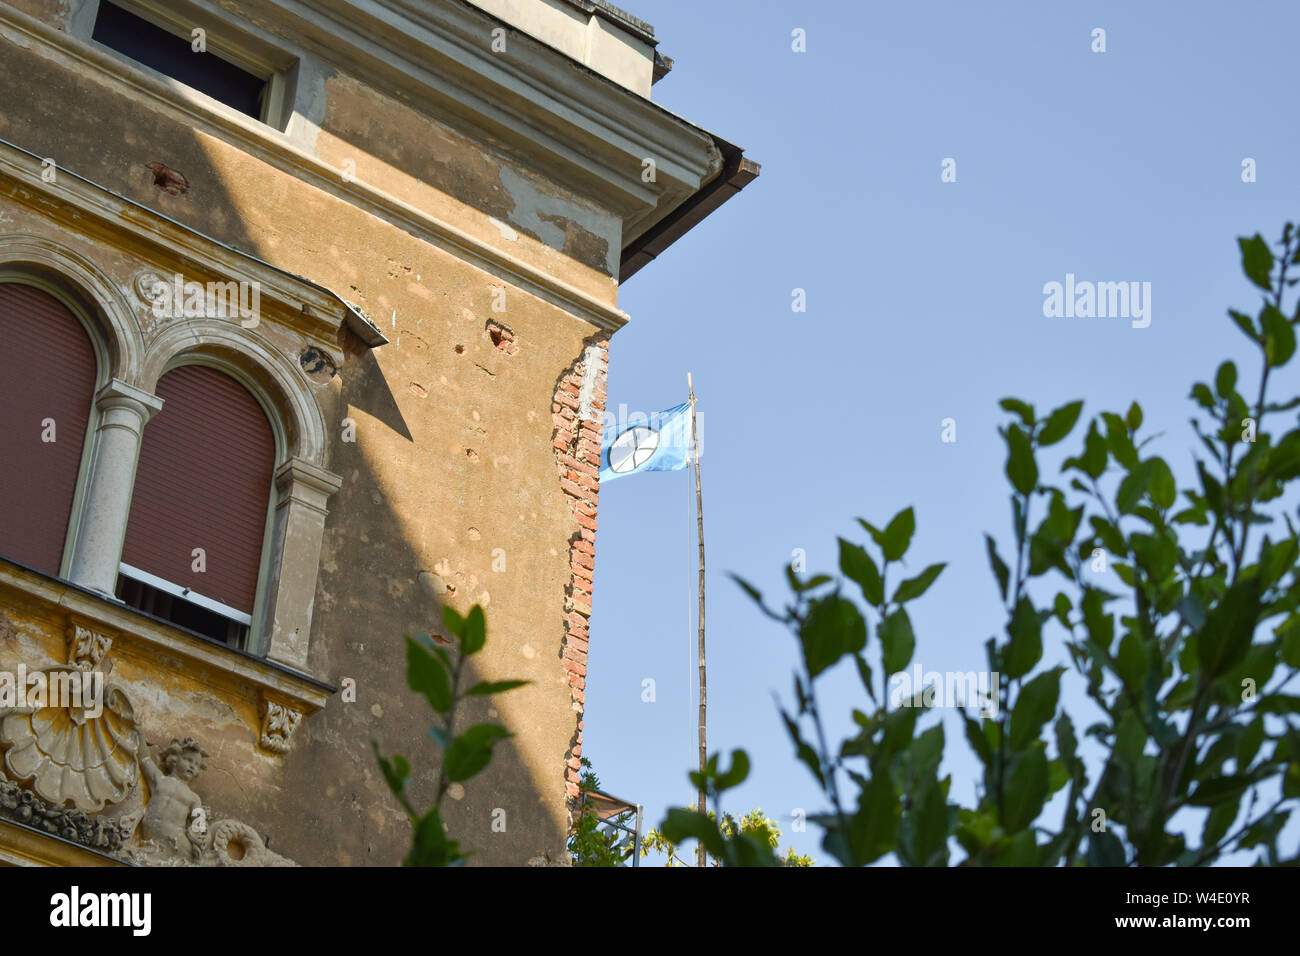 Flag with peace symbol behind historic building in Opatija, Croatia Stock Photo